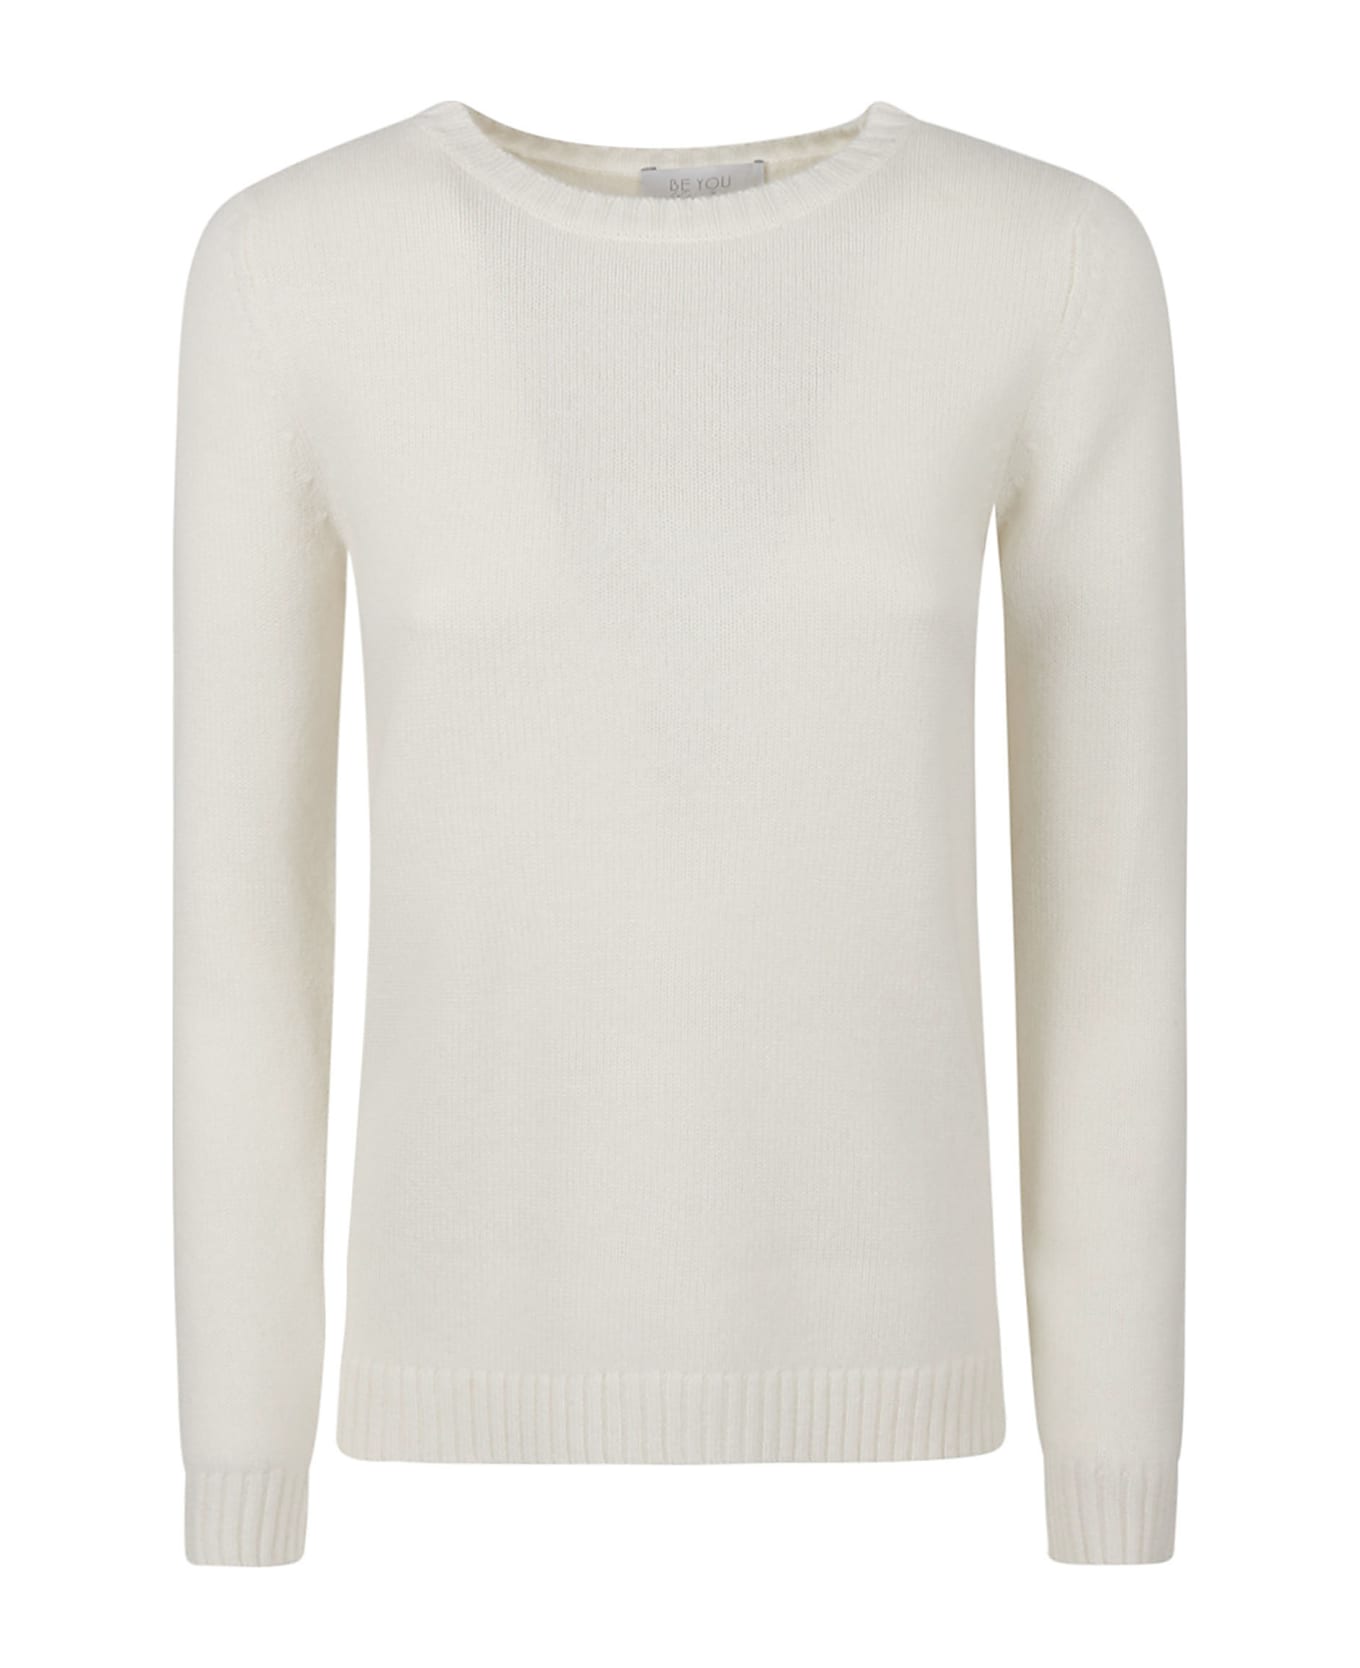 Be You Round Neck Sweater - White